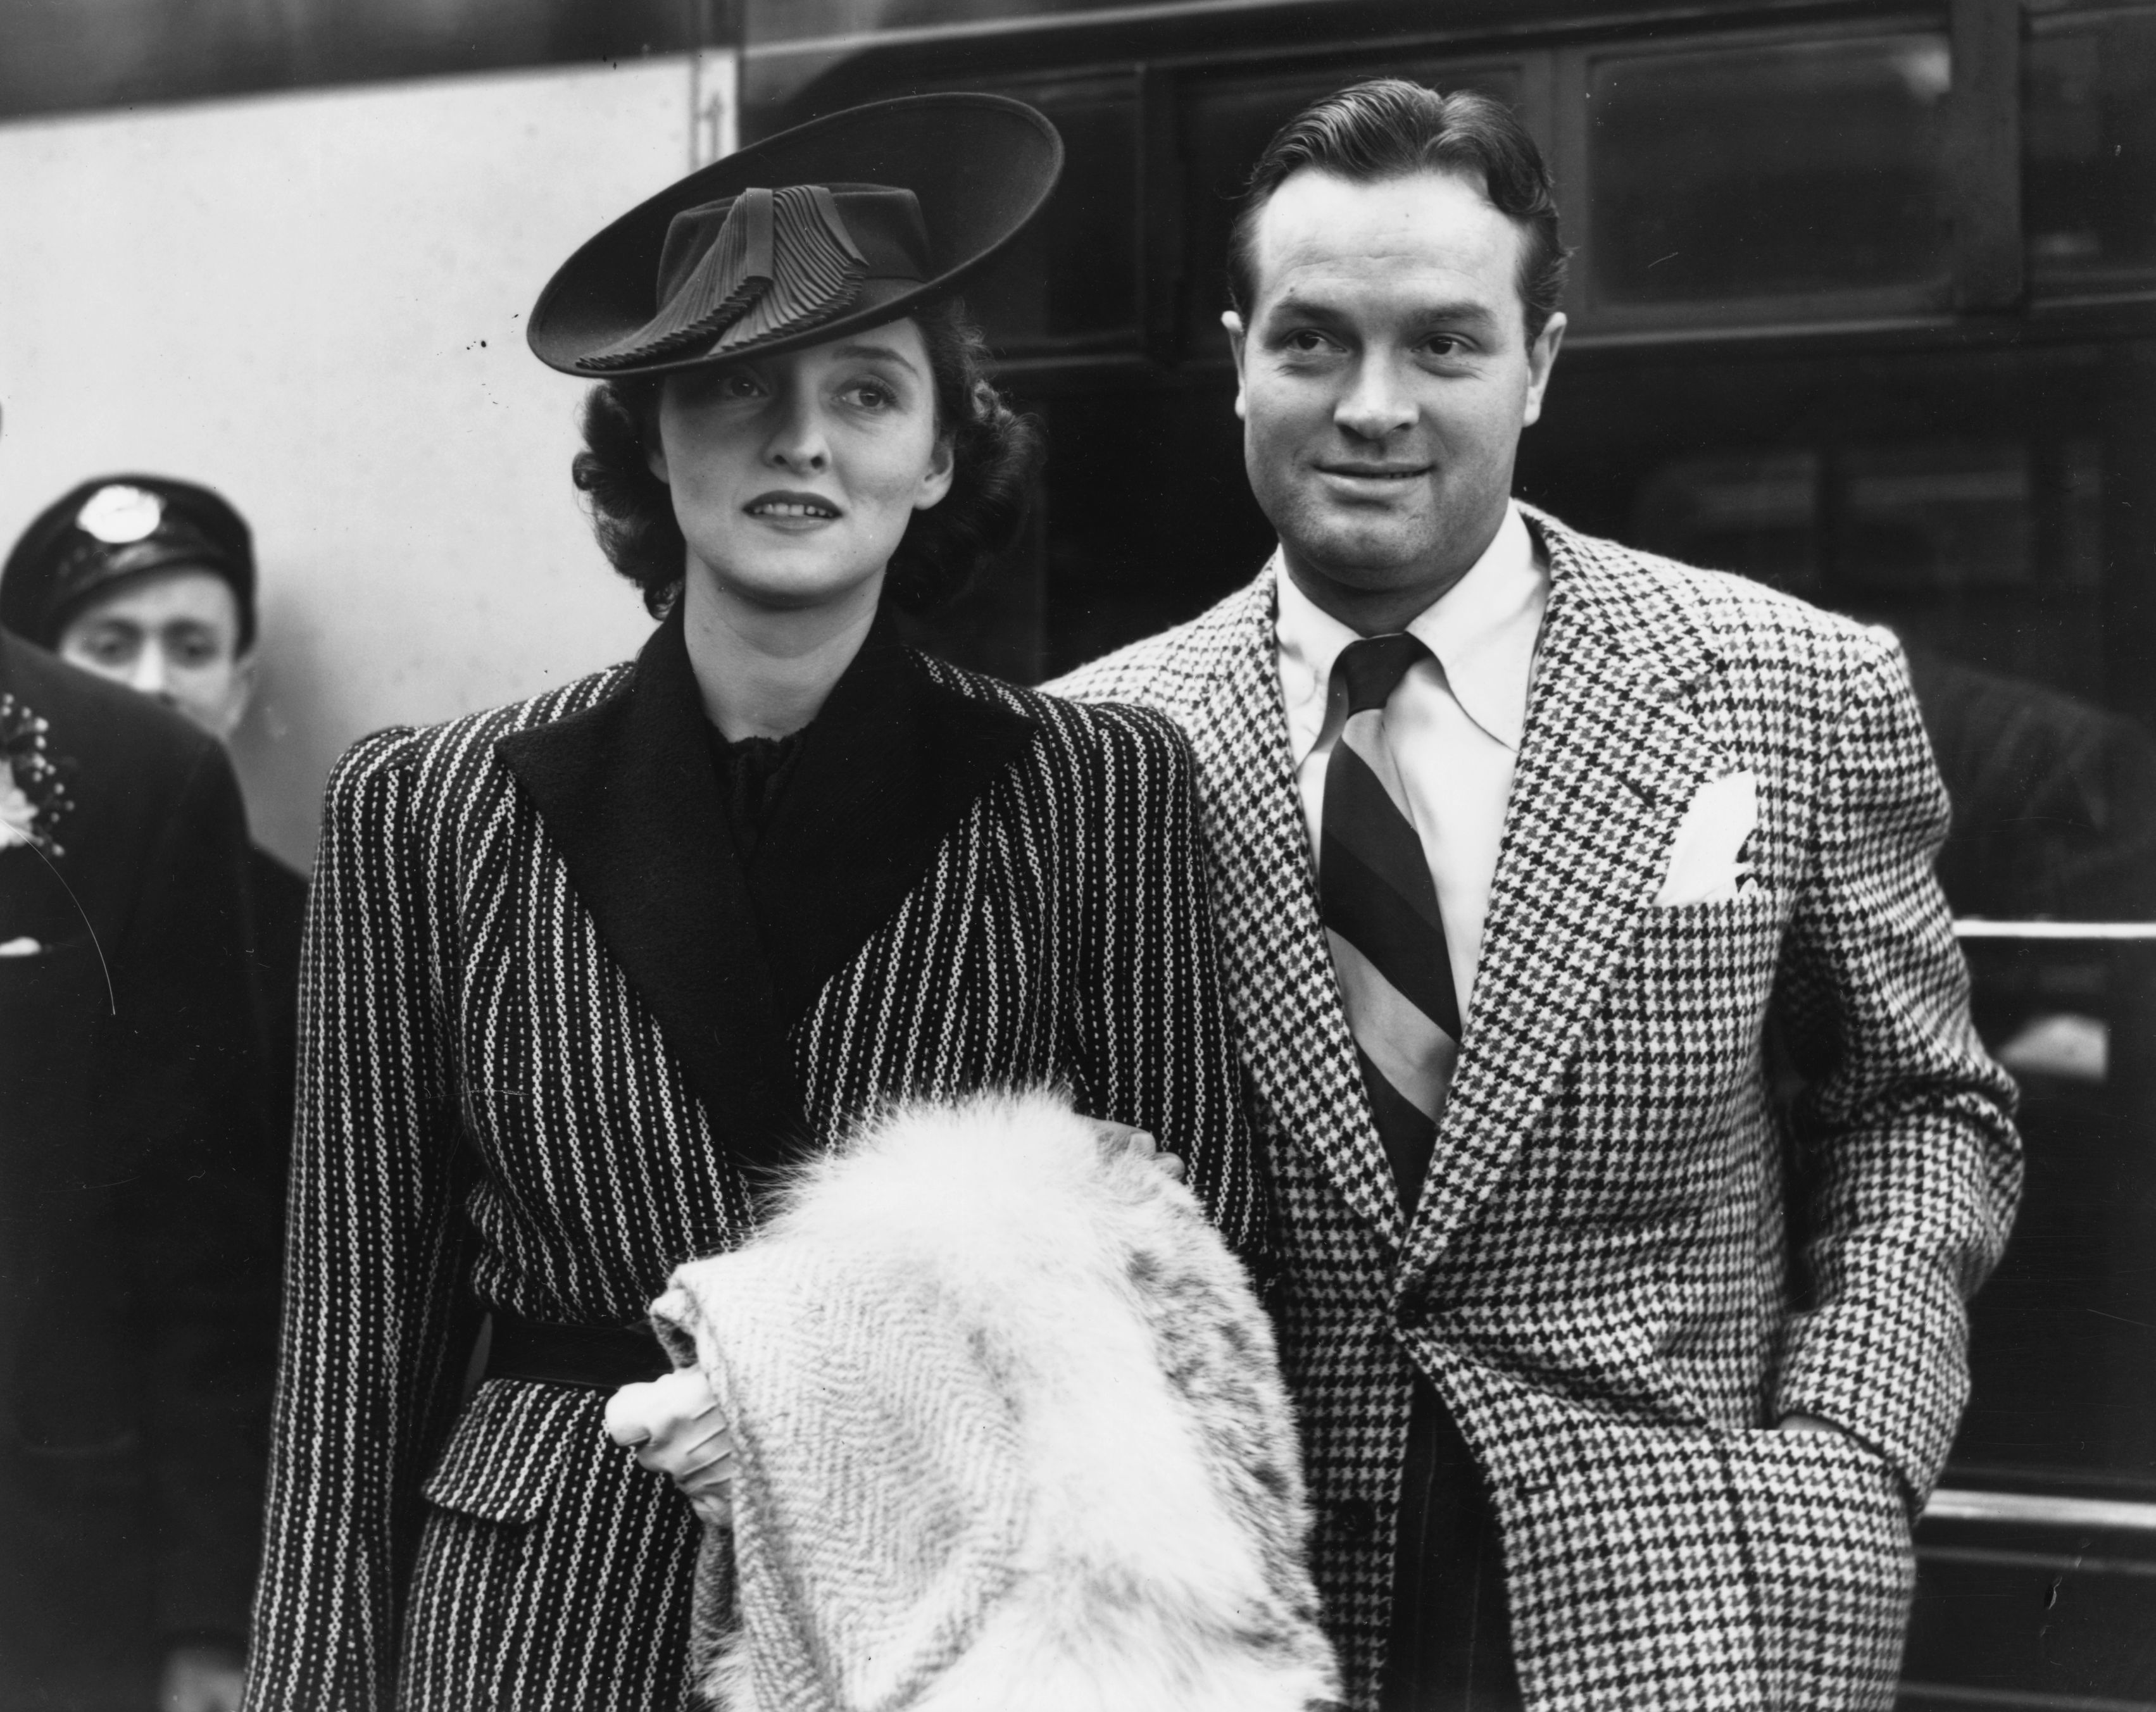 Bob Hope and Dolores at London's Waterloo Station on August 7, 1939 | Source: Getty Images